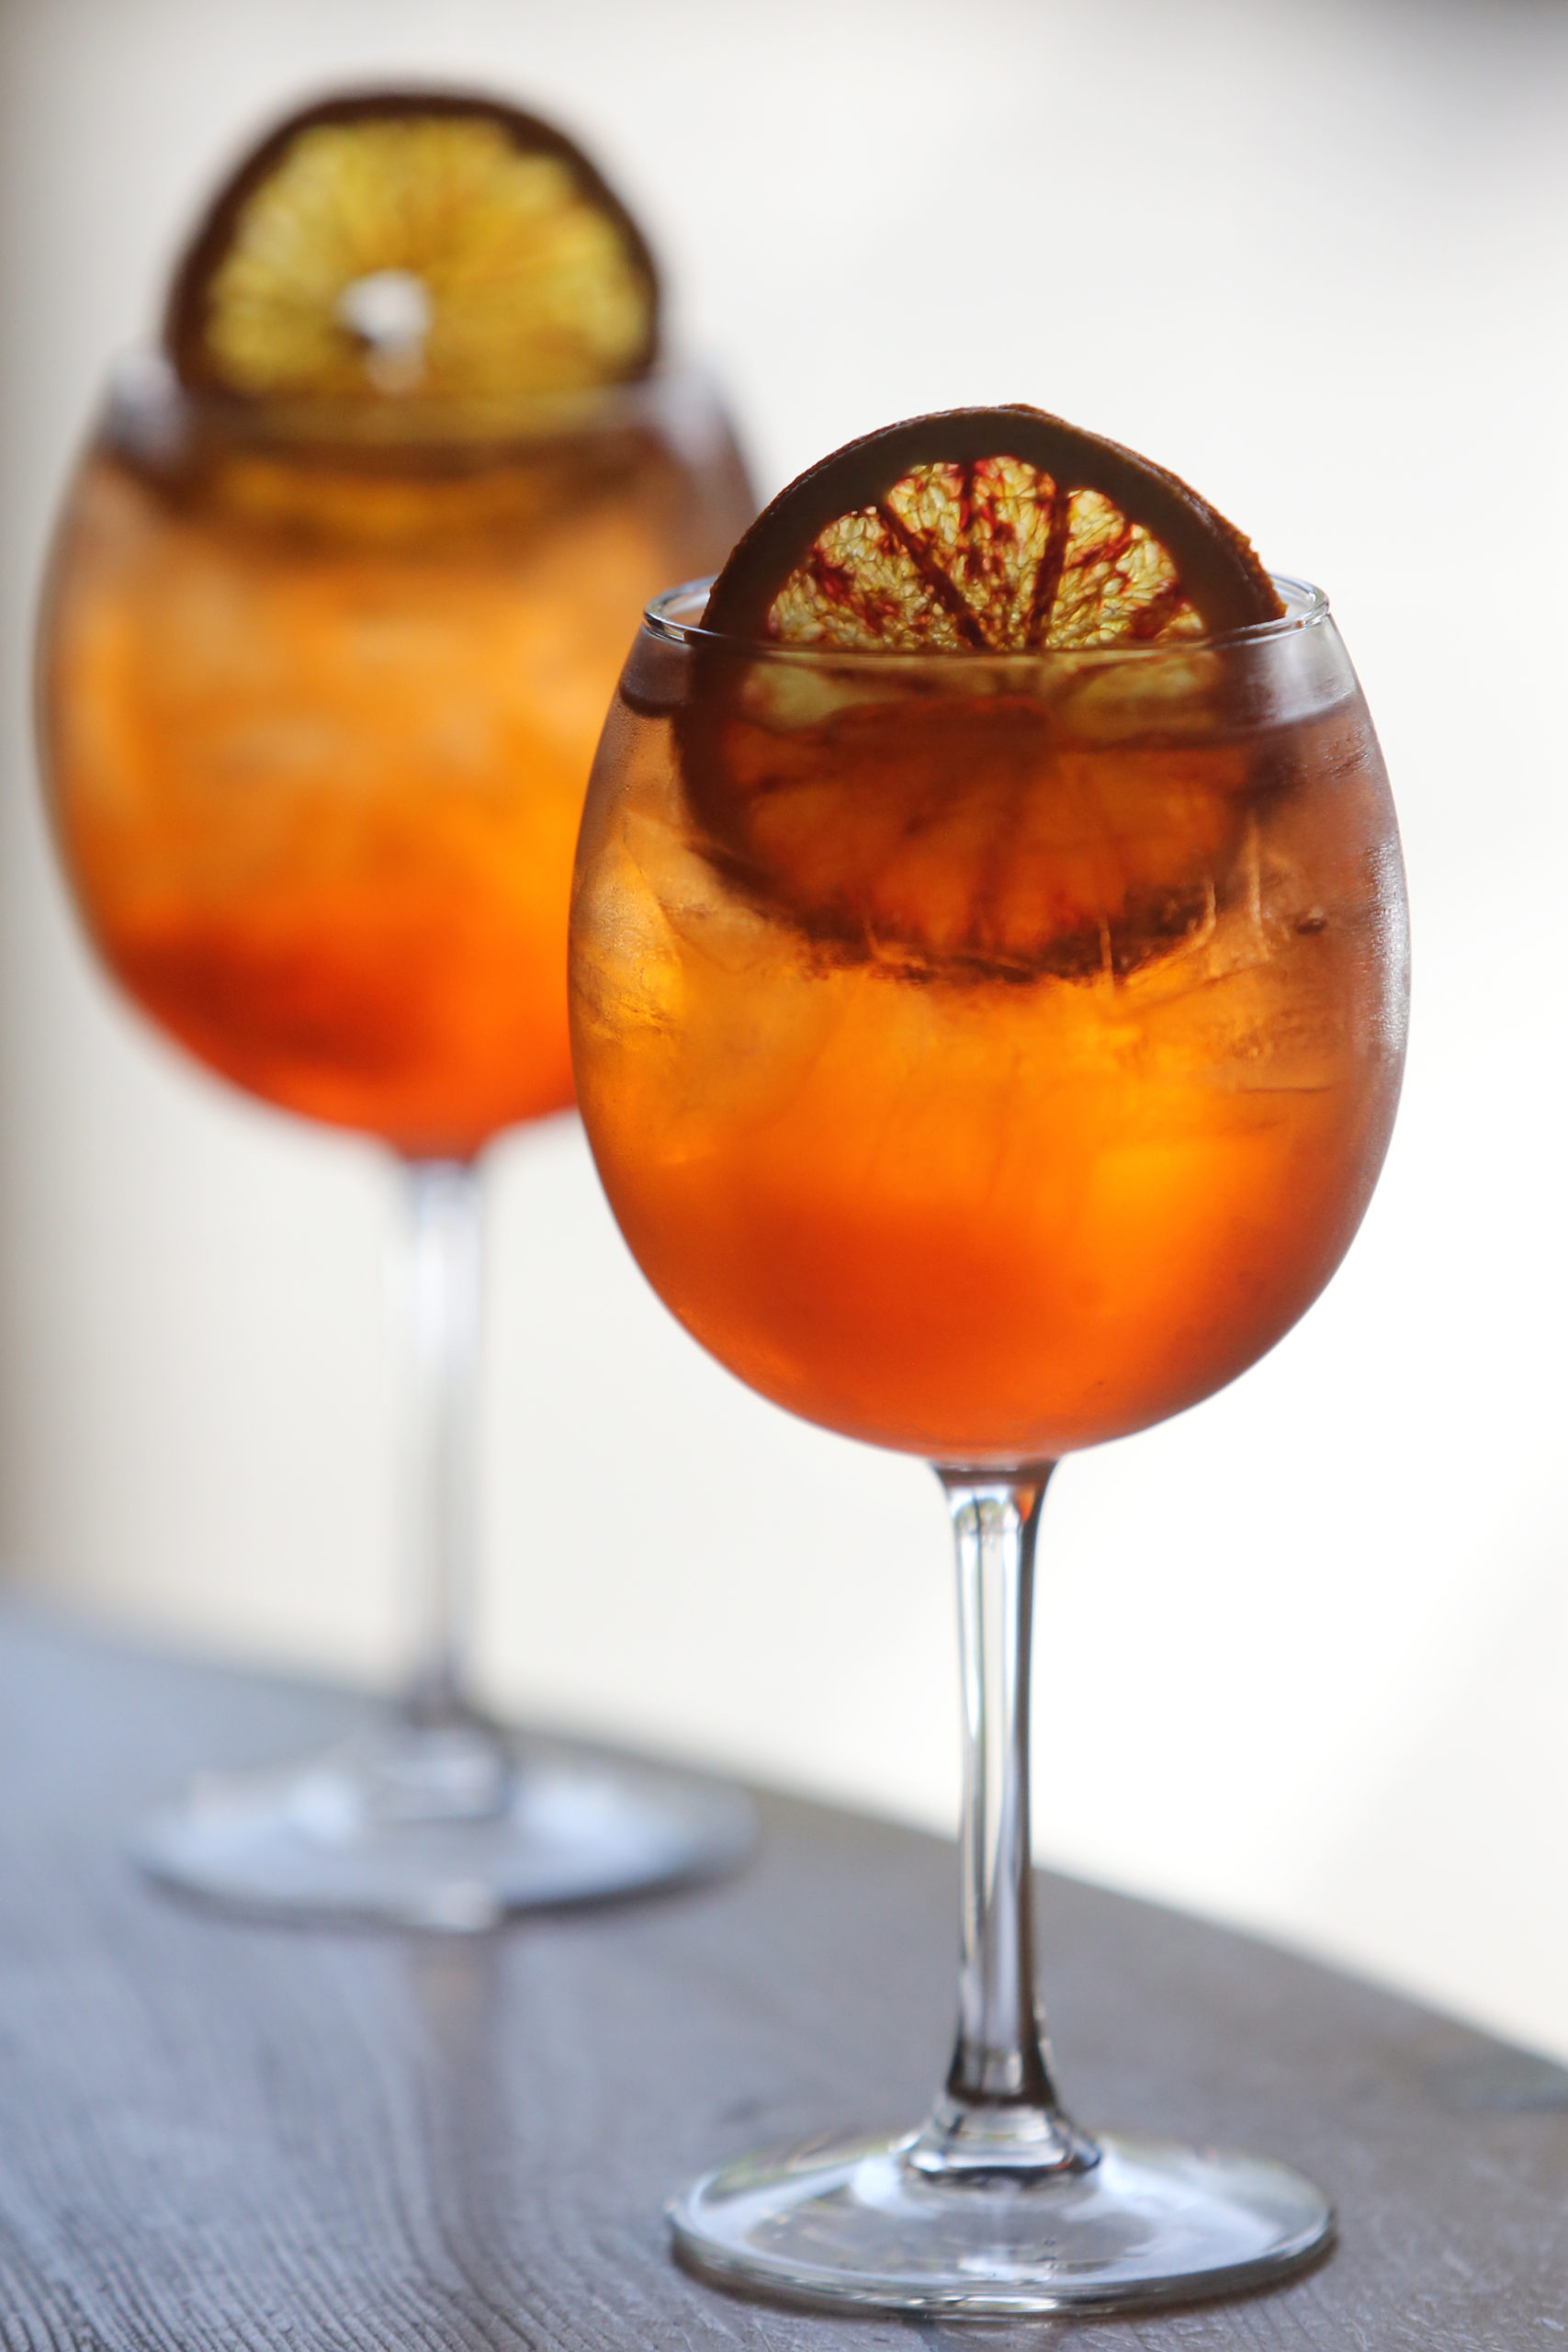 The Aperol Spritz cocktail at Negri&apos;s in Occidental, Calif., on Thursday, May 13, 2021. (Beth Schlanker/Sonoma Magazine)